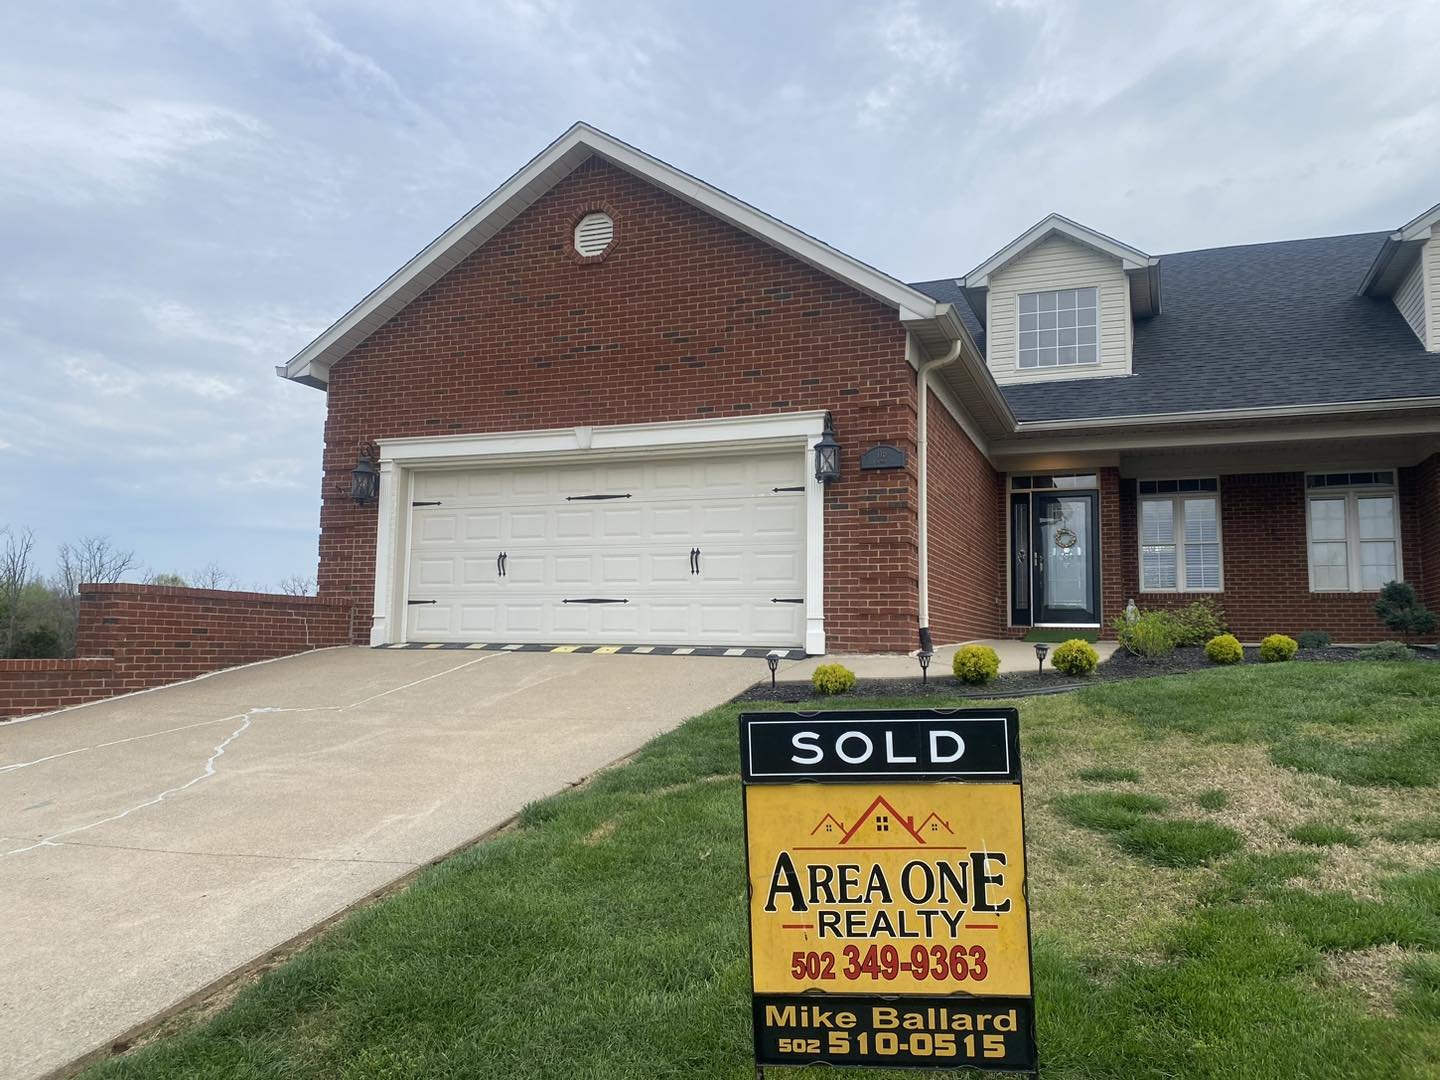 💥‼️ SOLD‼️💥 SOLD‼️💥 SOLD‼️💥
Beautiful Maywood Townhome 🏠 SOLD by Mike &amp; Kathy Ballard of Area One Realty at 116 Remington Drive in historic Batdatown, Ky!!

Looking to get your home 🏡 SOLD?  We can help! Give us a call 📞 today at Area One 